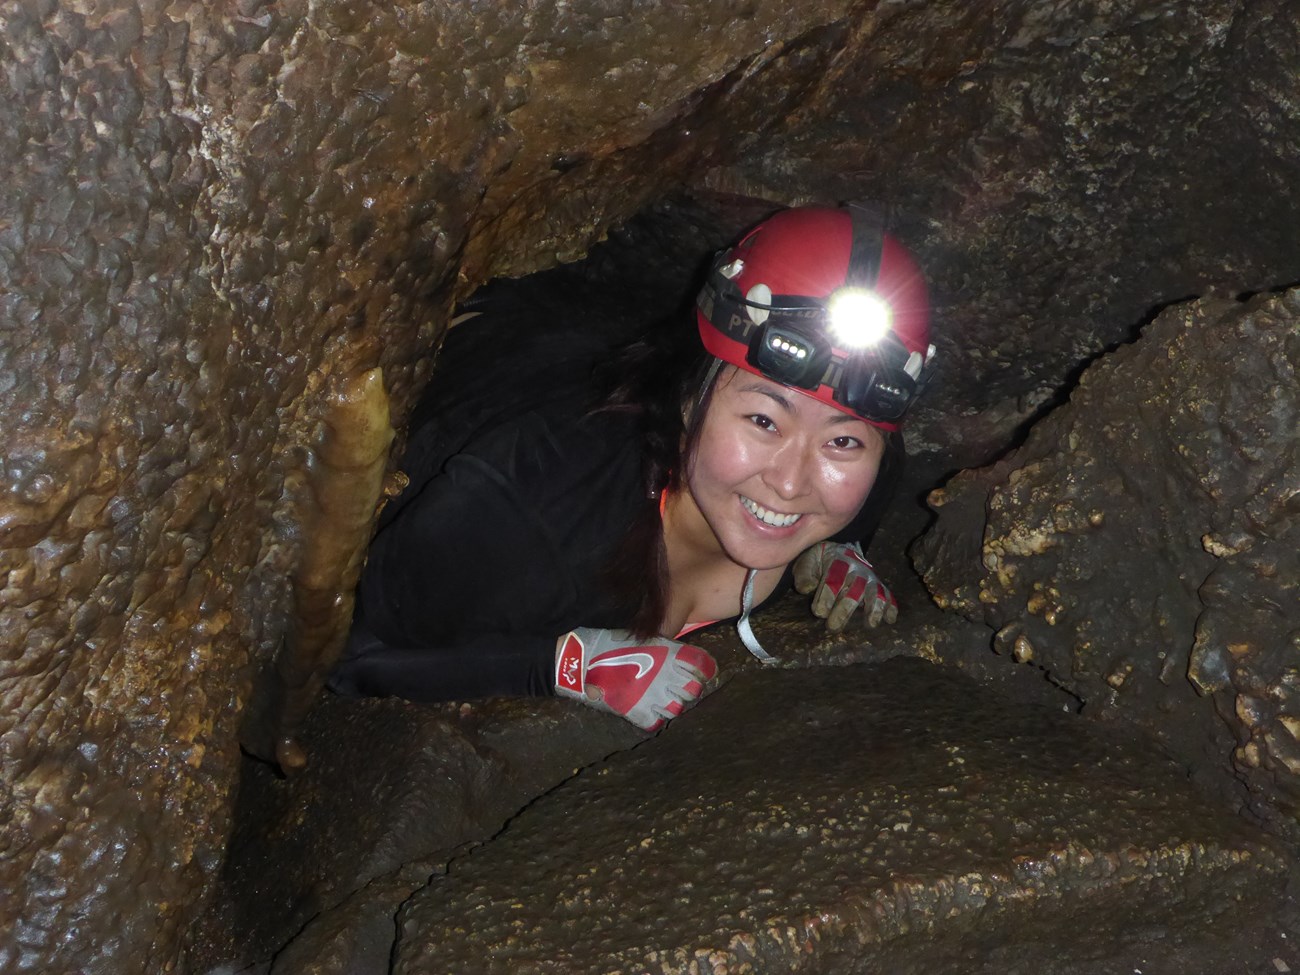 A caver wearing a helmet and headlamp squeezes through a tight opening.